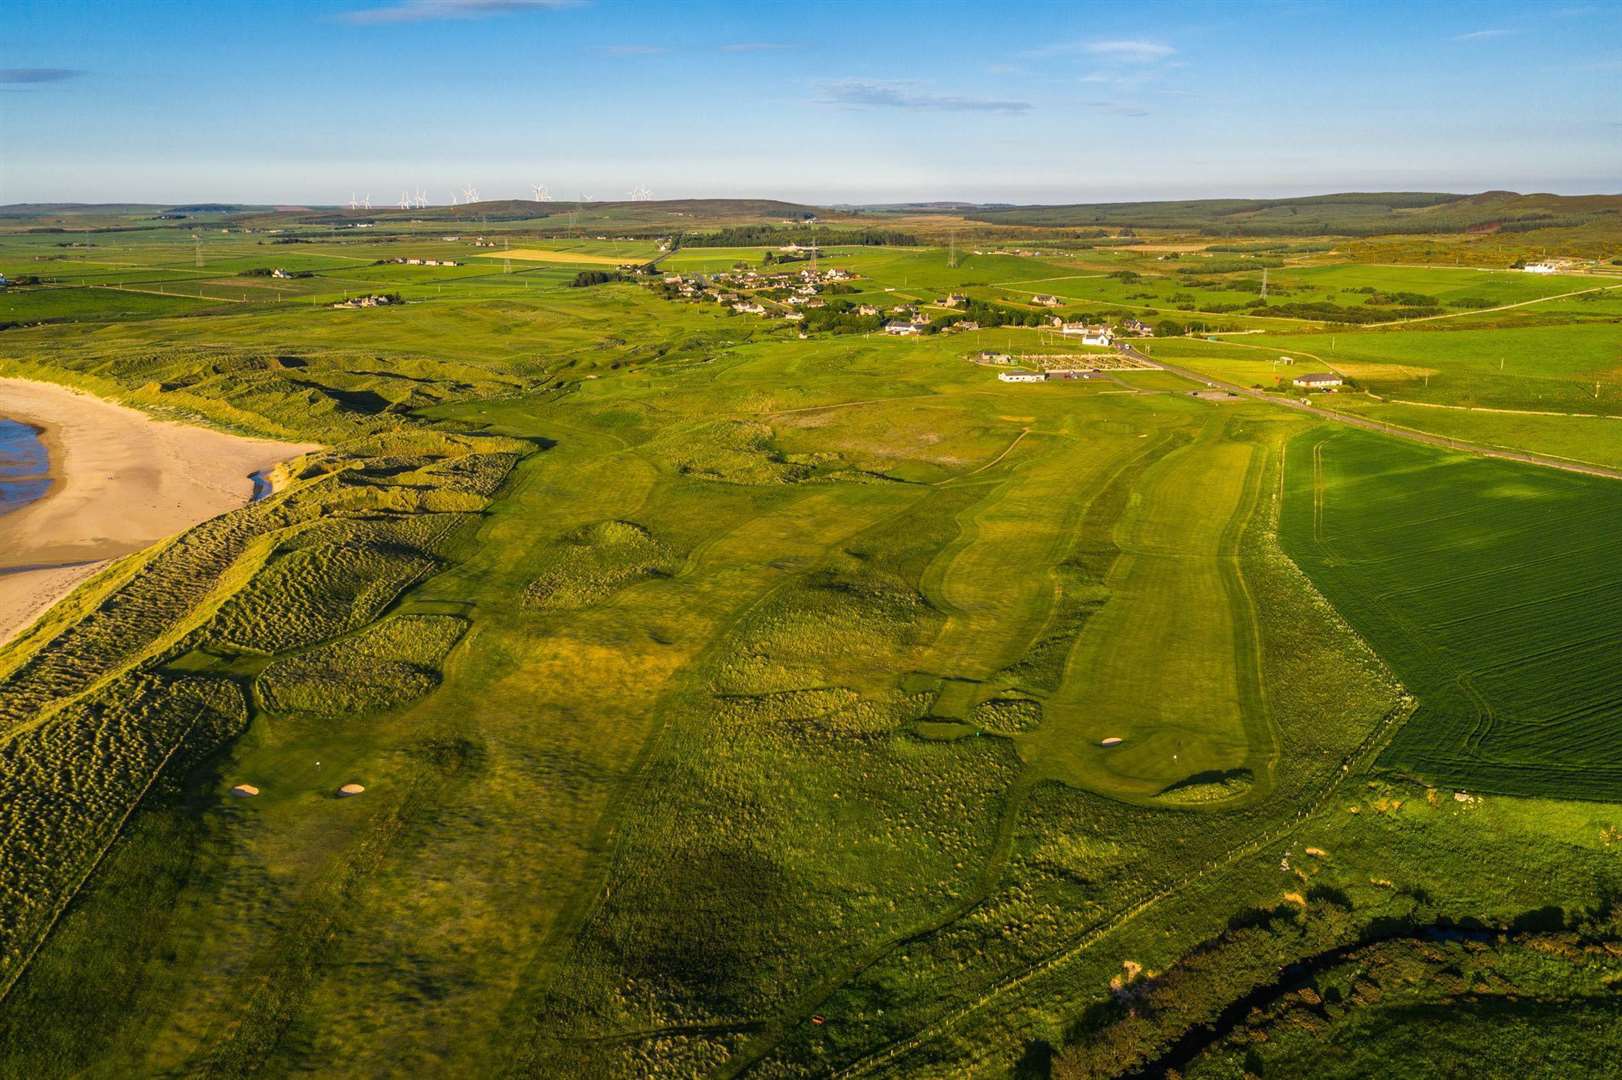 Reay Golf Club hopes to attract more members and visitors by improving the playing condition of the 18-hole course. Picture: Craig Macintosh / Highland Drones